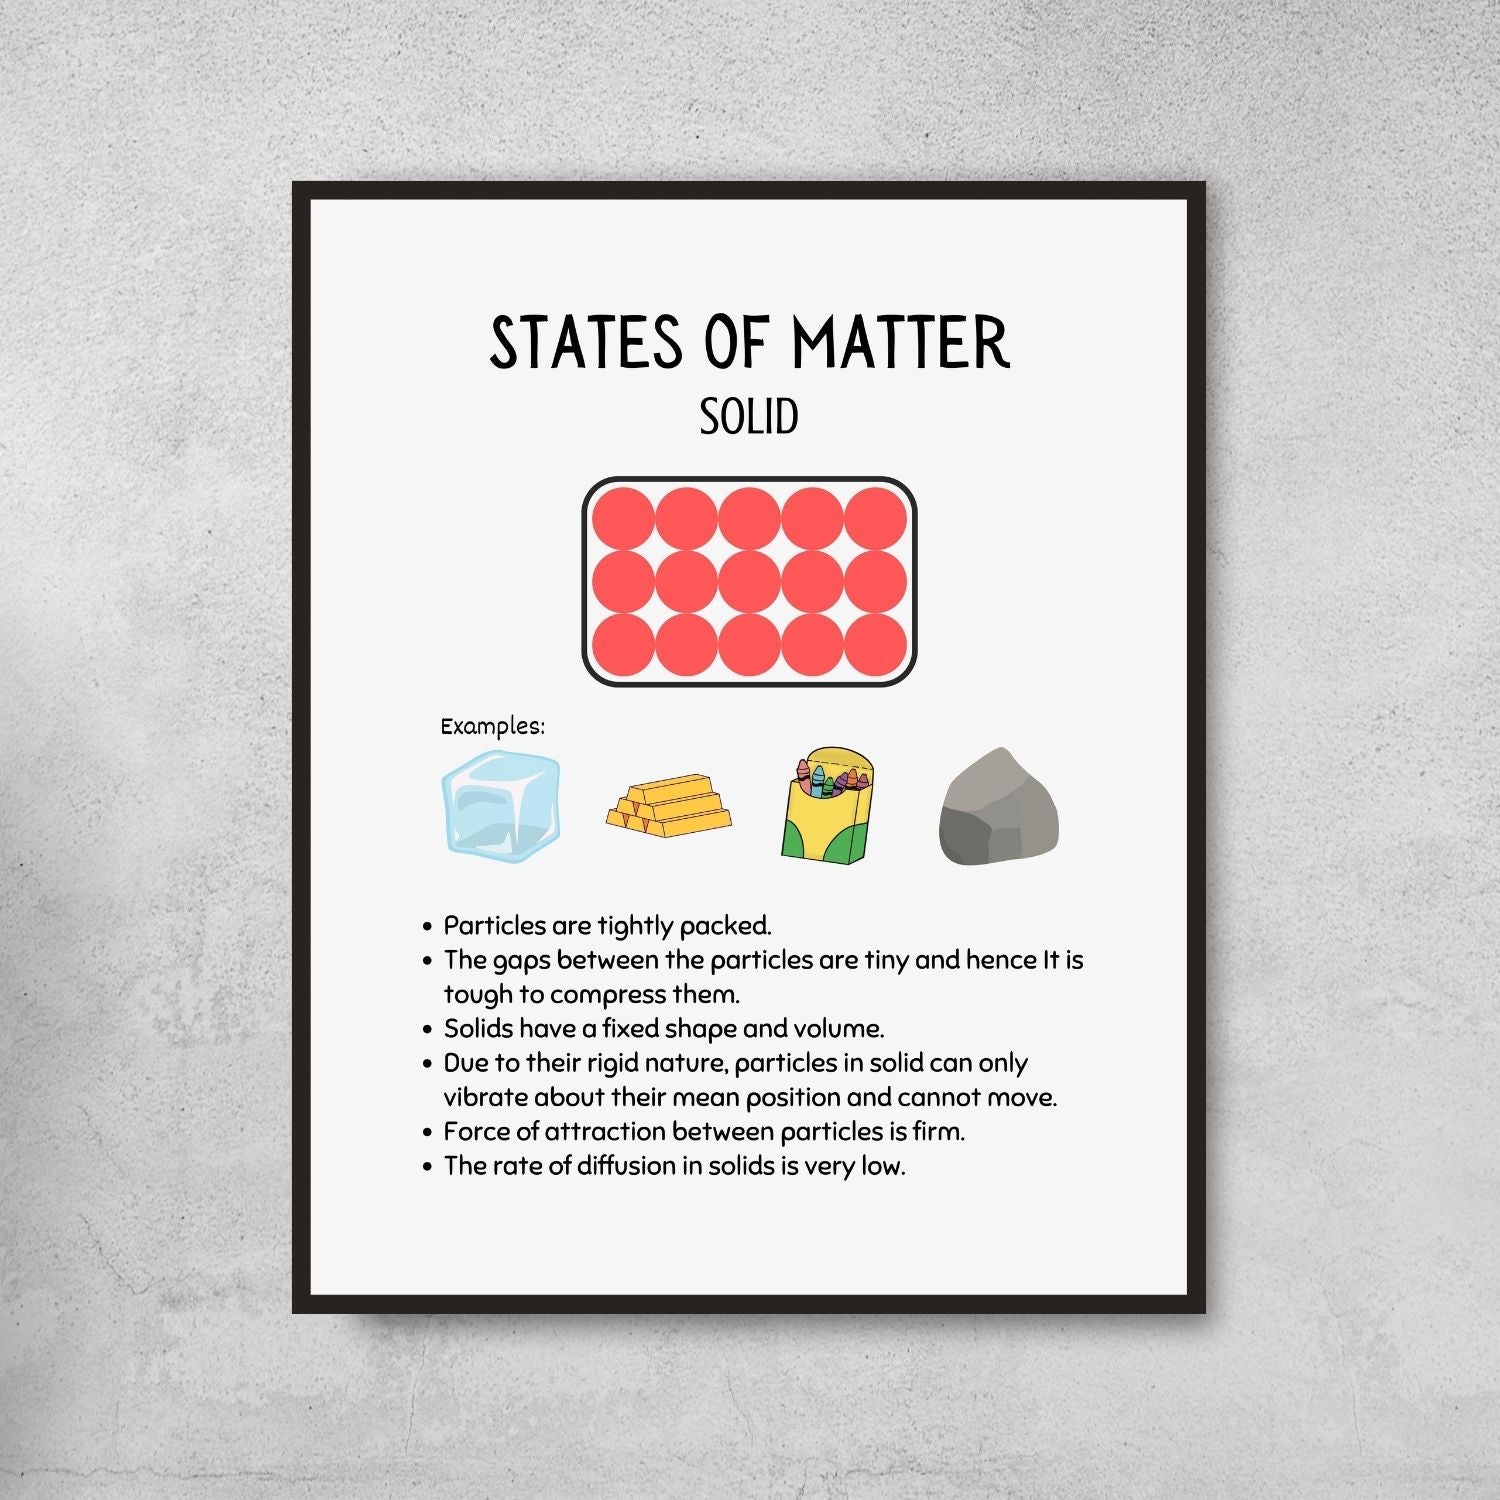 States of matter poster set for science classroom decoration